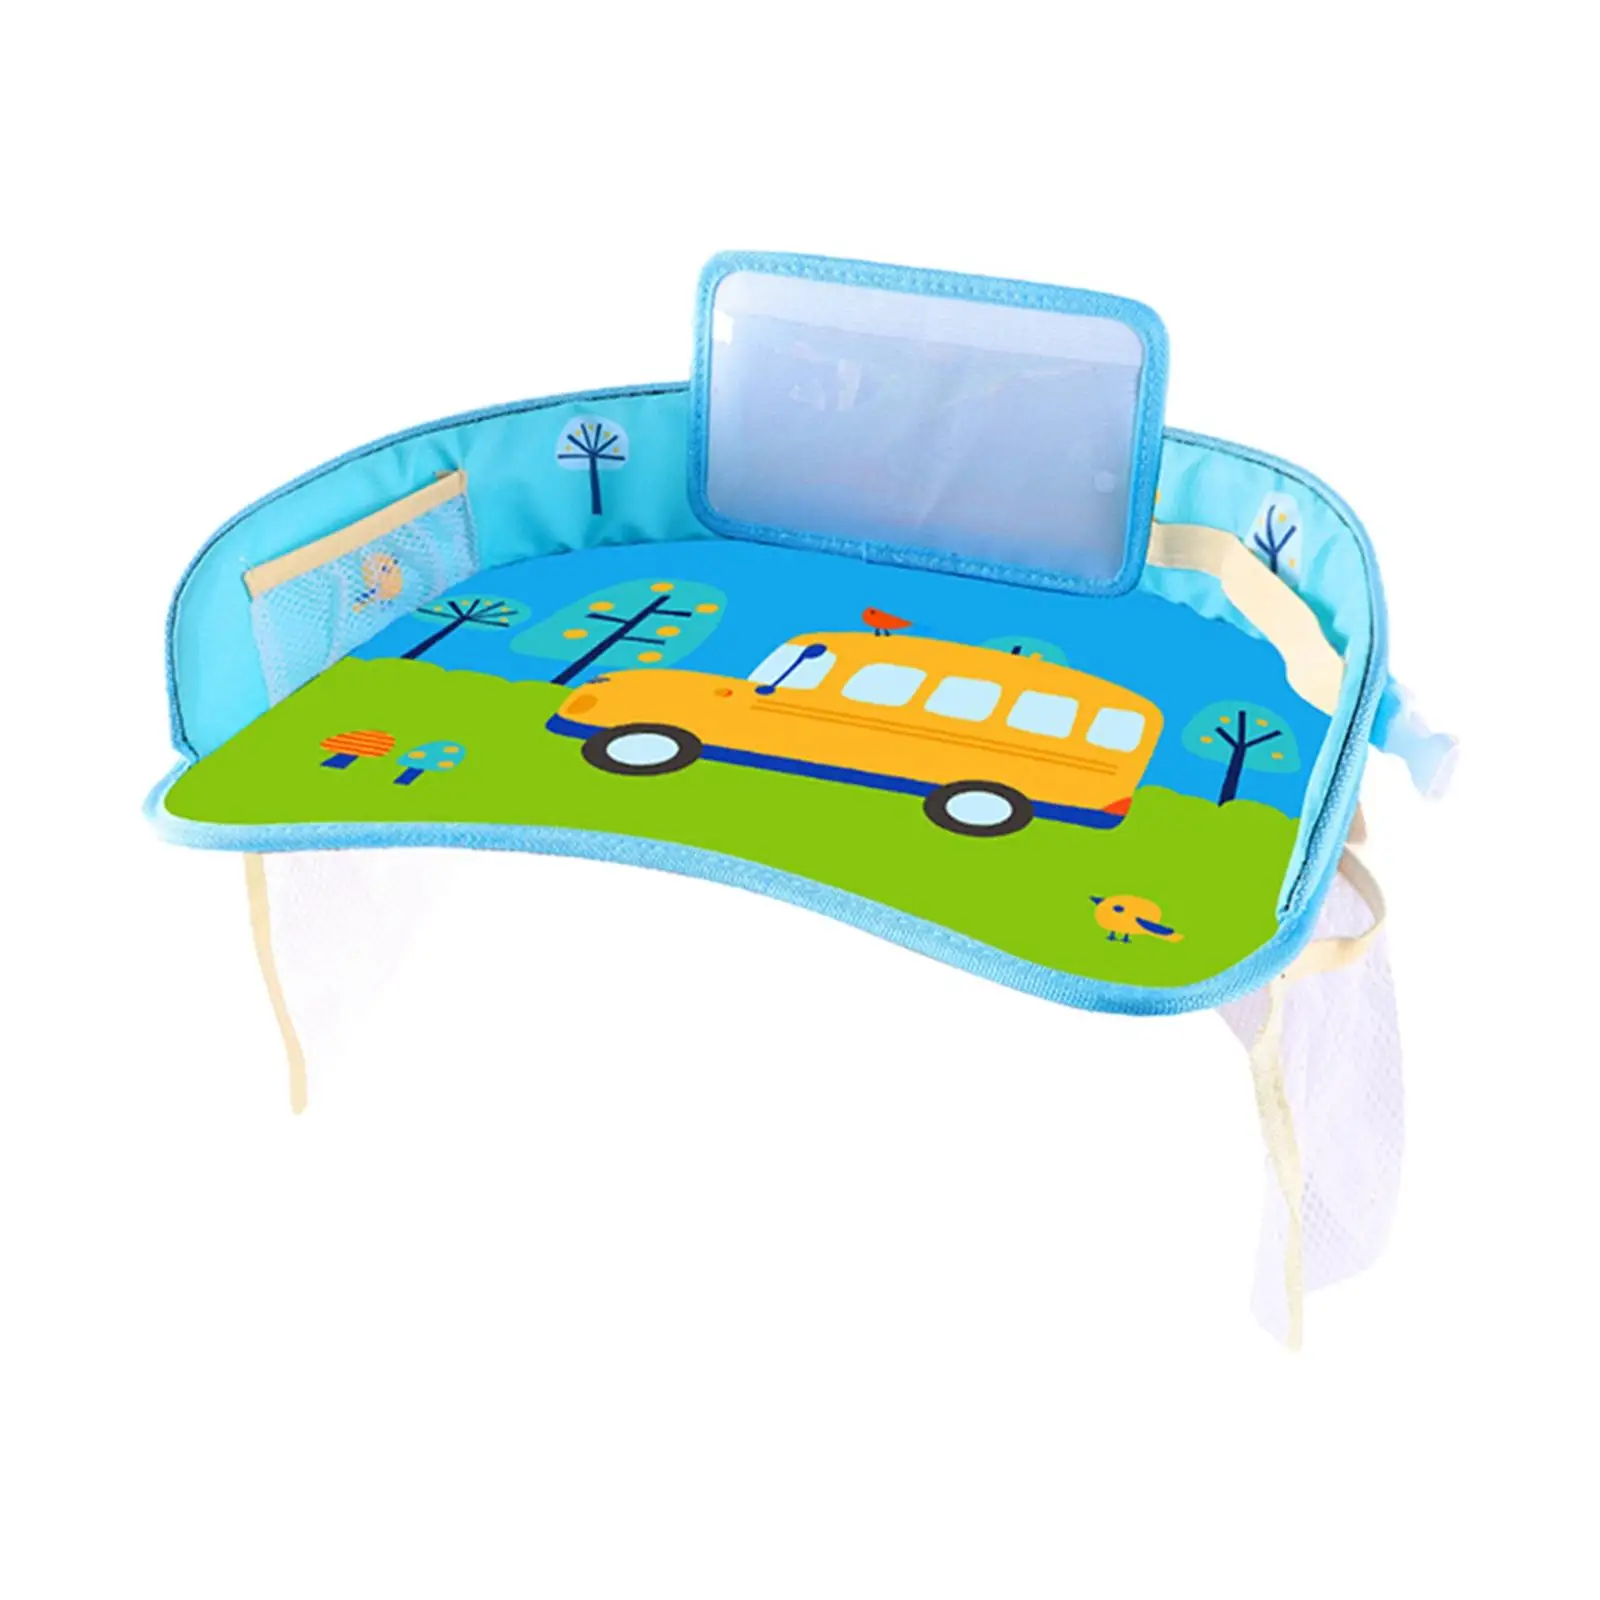  Tray Eating Drawing Snack Tray for Road Trip Airplane Stroller